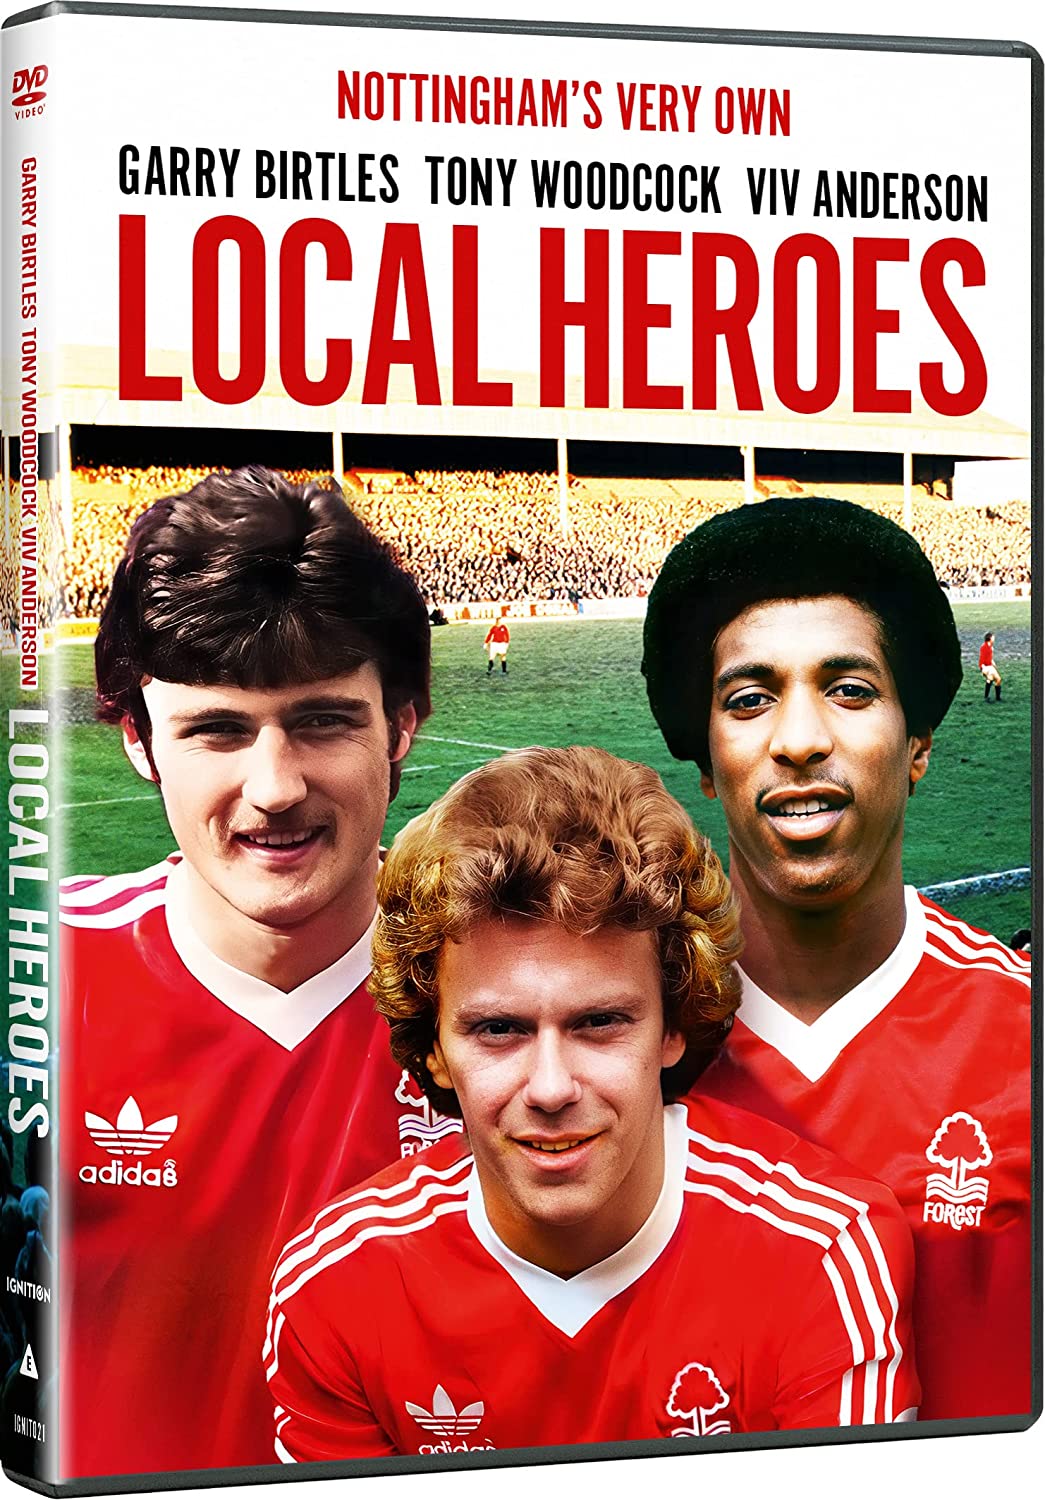 Nottinghams_very_own_local_heroes_DVD_cover